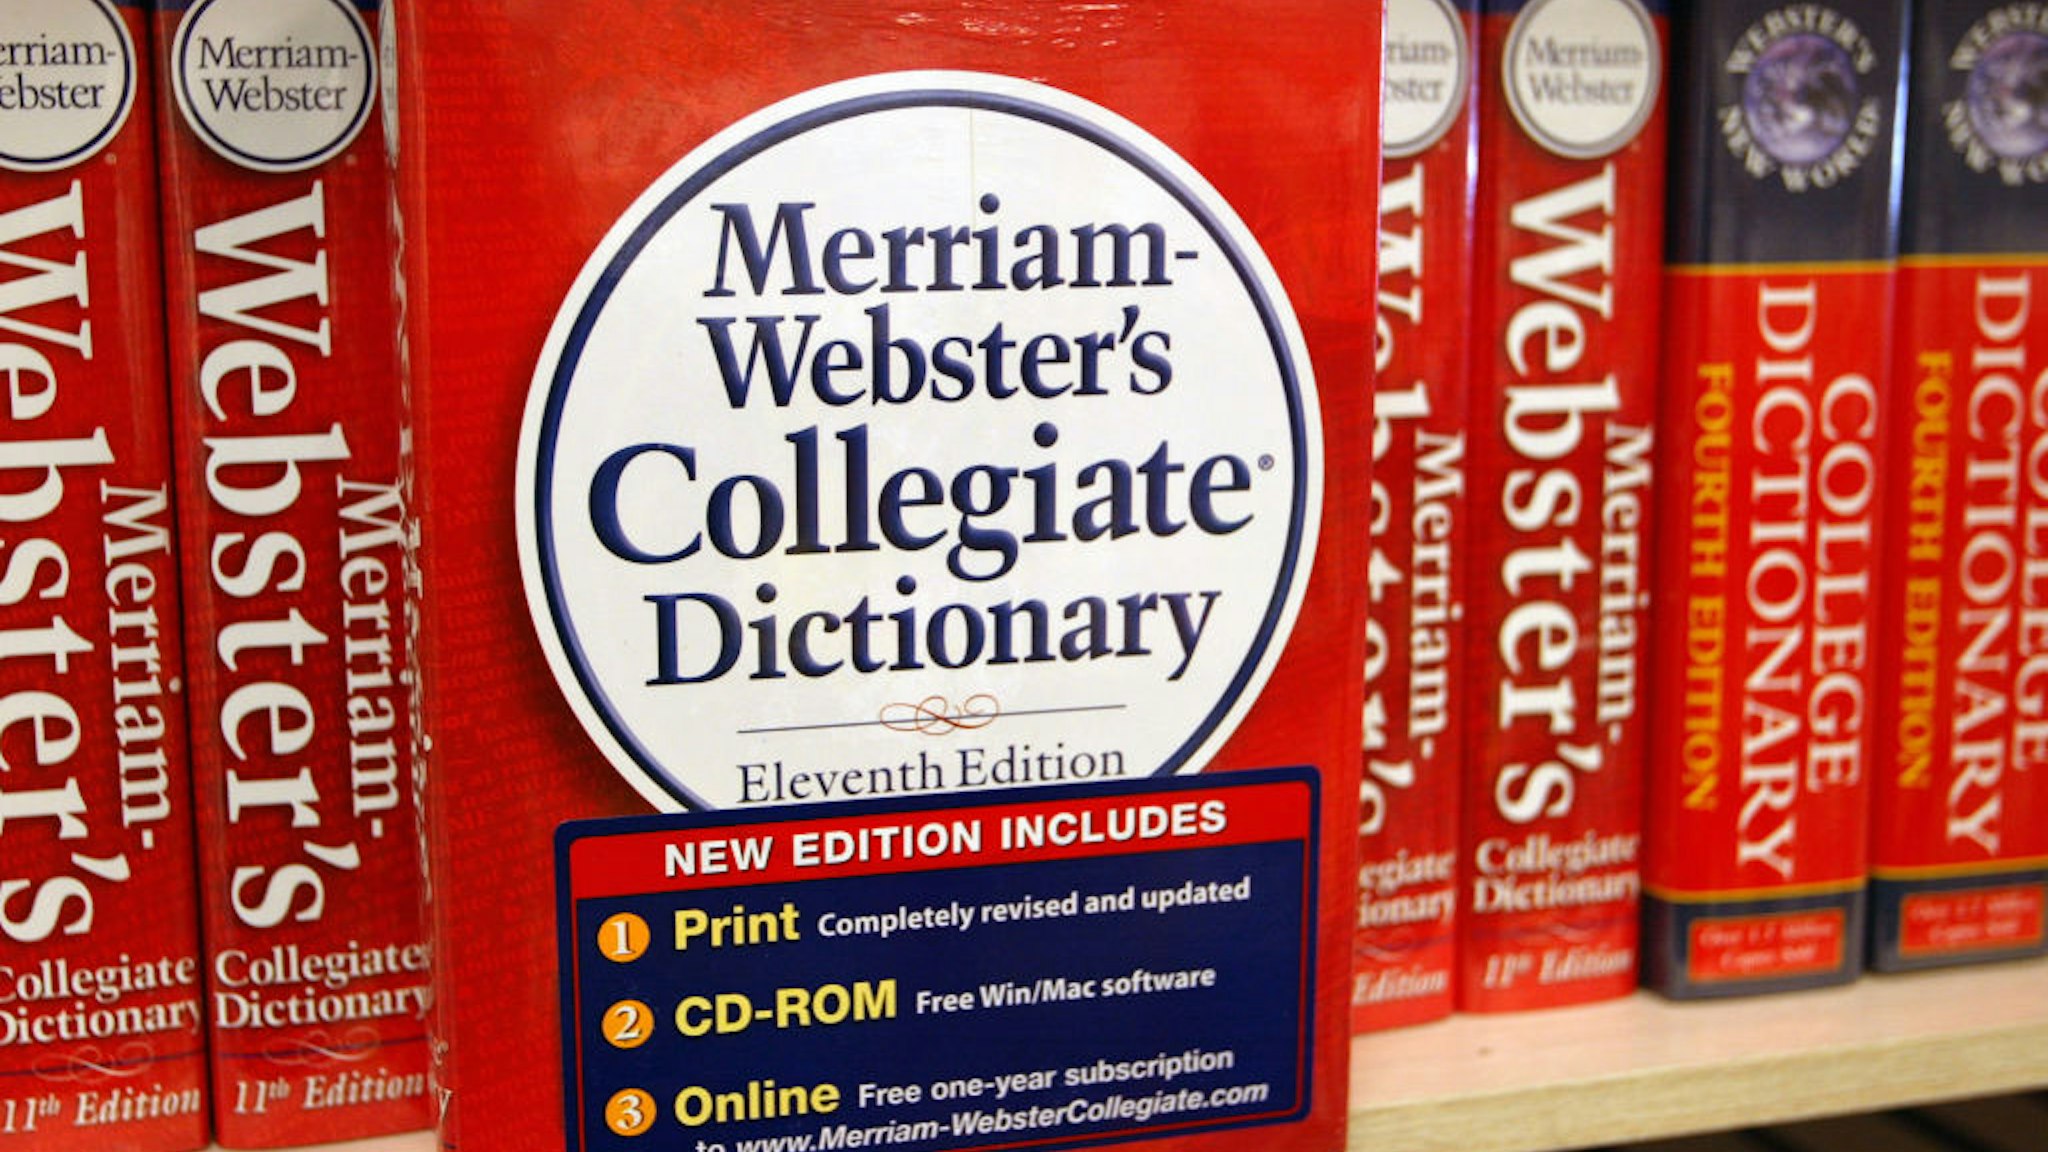 A Merriam-Webster's Collegiate Dictionary is displayed in a bookstore November 10, 2003 in Niles, Illinois.